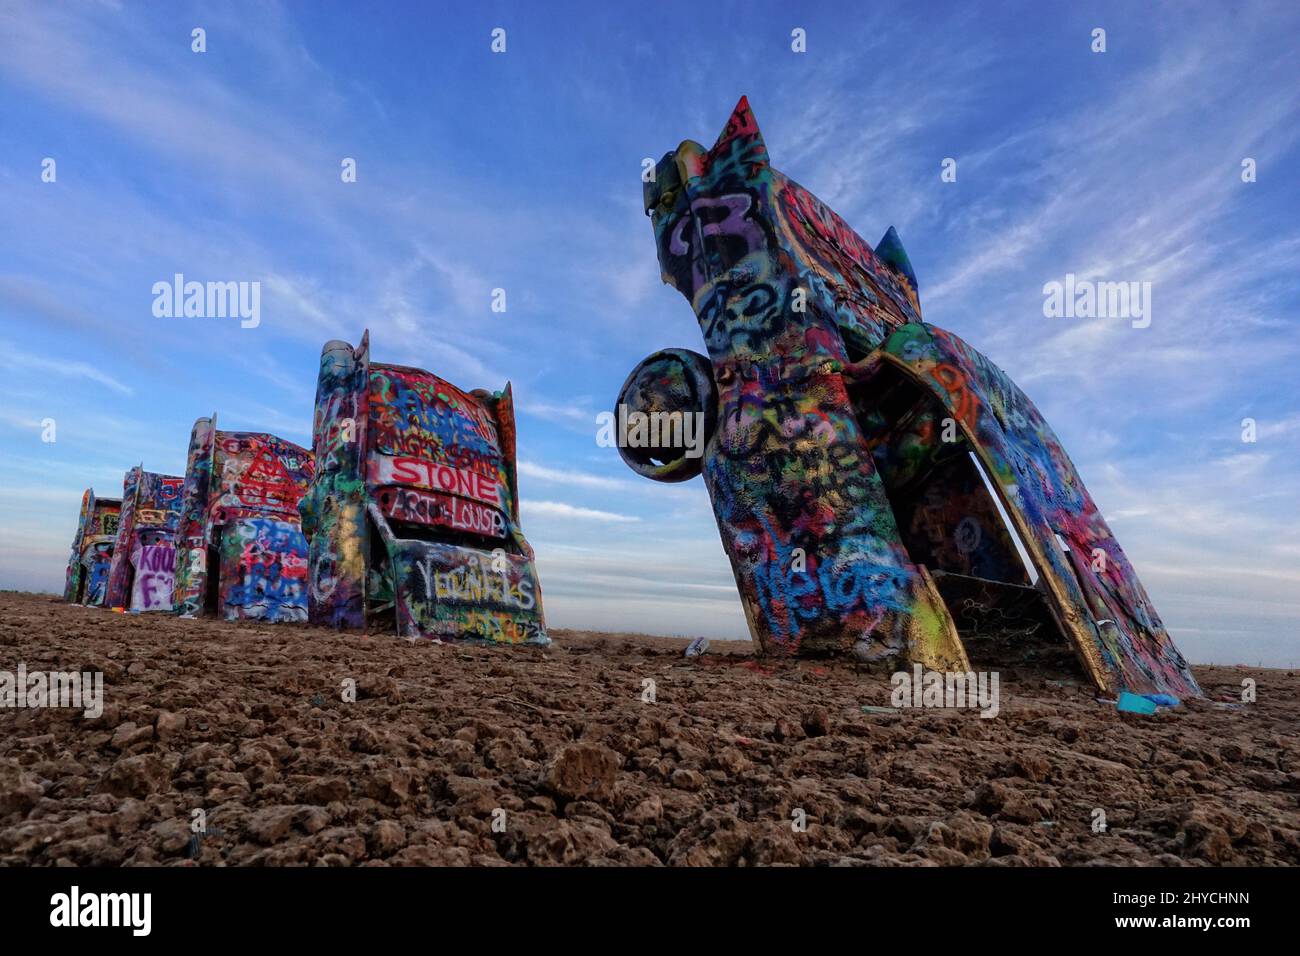 Cadillac Ranch is not a ranch but a public art installation and sculpture in Amarillo, Texas, USA. Used Cadillac automobiles are half-buried nose-first in the ground, at an angle corresponding to that of the Great Pyramid of Giza in Egypt, and show off the different styles of tail fins. Cadillac Ranch is visible from the highway, off Route 66. Located on private land, visiting is encouraged. In addition, writing graffiti on or spray-painting the vehicles is now encouraged. Everytime you visit, its is a different experience, for it is always changing Stock Photo